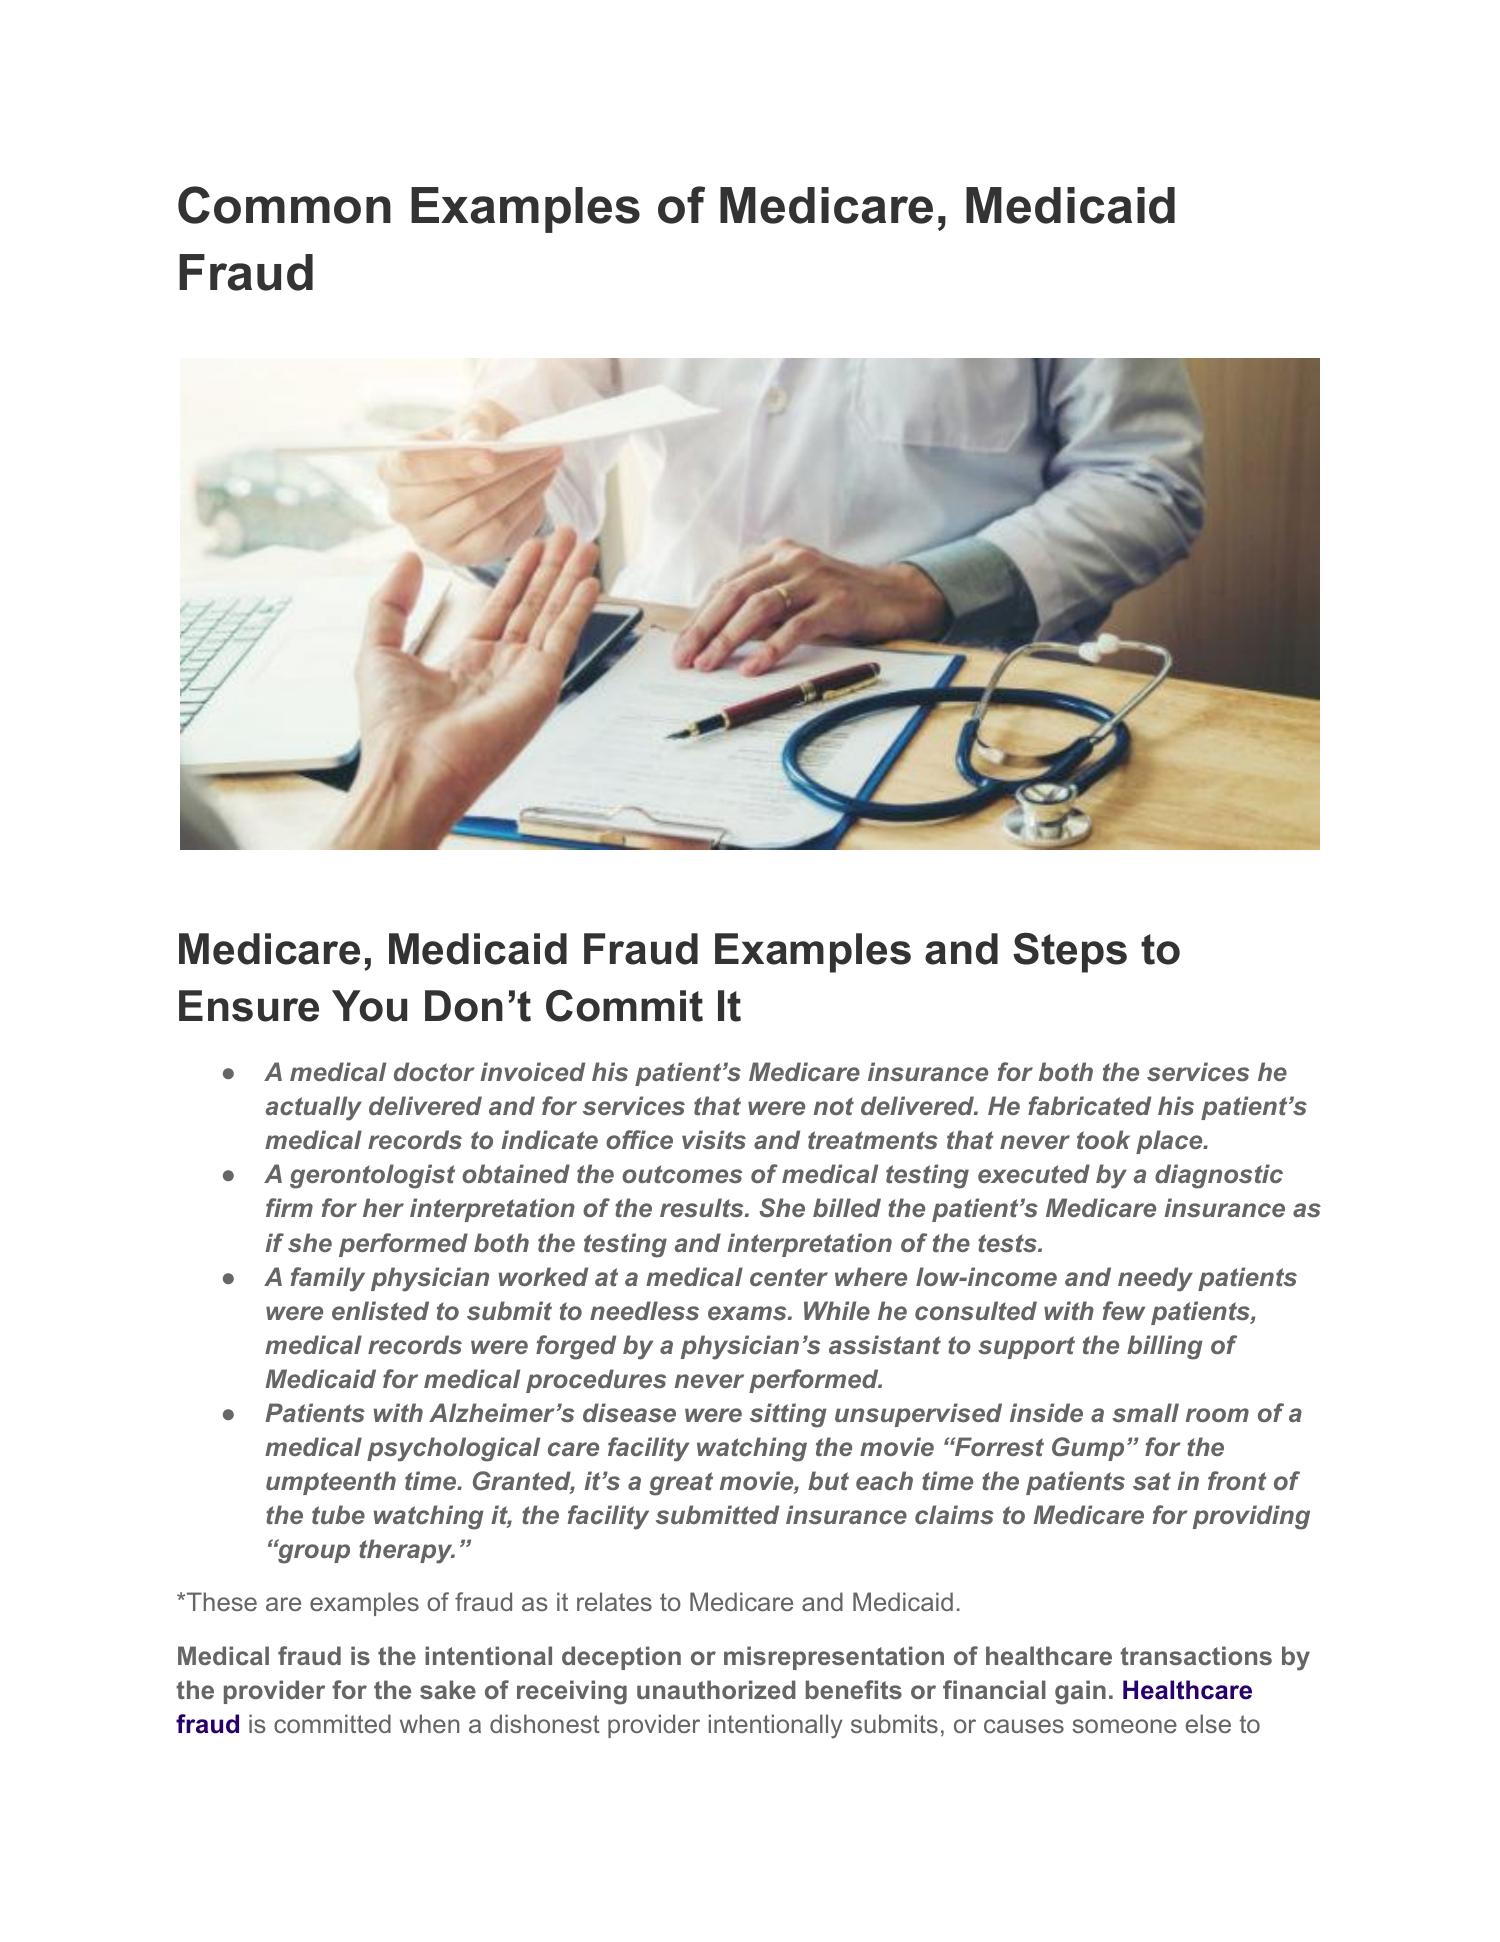 Common Examples of Medicare, Medicaid
Fraud

NIN
\

 

Medicare, Medicaid Fraud Examples and Steps to
Ensure You Don’t Commit It

eo A medical doctor invoiced his patient's Medicare insurance for both the services he
actually delivered and for services that were not delivered. He fabricated his patient's
medical records to indicate office visits and treatments that never took place.

e A gerontologist obtained the outcomes of medical testing executed by a diagnostic
firm for her interpretation of the results. She billed the patient's Medicare insurance as
if she performed both the testing and interpretation of the tests.

e A family physician worked at a medical center where low-income and needy patients
were enlisted to submit to needless exams. While he consulted with few patients,
medical records were forged by a physician’s assistant to support the billing of
Medicaid for medical procedures never performed.

e Patients with Alzheimer’s disease were sitting unsupervised inside a small room of a
medical psychological care facility watching the movie “Forrest Gump” for the
umpteenth time. Granted, it’s a great movie, but each time the patients sat in front of
the tube watching it, the facility submitted insurance claims to Medicare for providing
“group therapy.”

*These are examples of fraud as it relates to Medicare and Medicaid

Medical fraud is the intentional deception or misrepresentation of healthcare transactions by
the provider for the sake of receiving unauthorized benefits or financial gain. Healthcare
fraud is committed when a dishonest provider intentionally submits, or causes someone else to